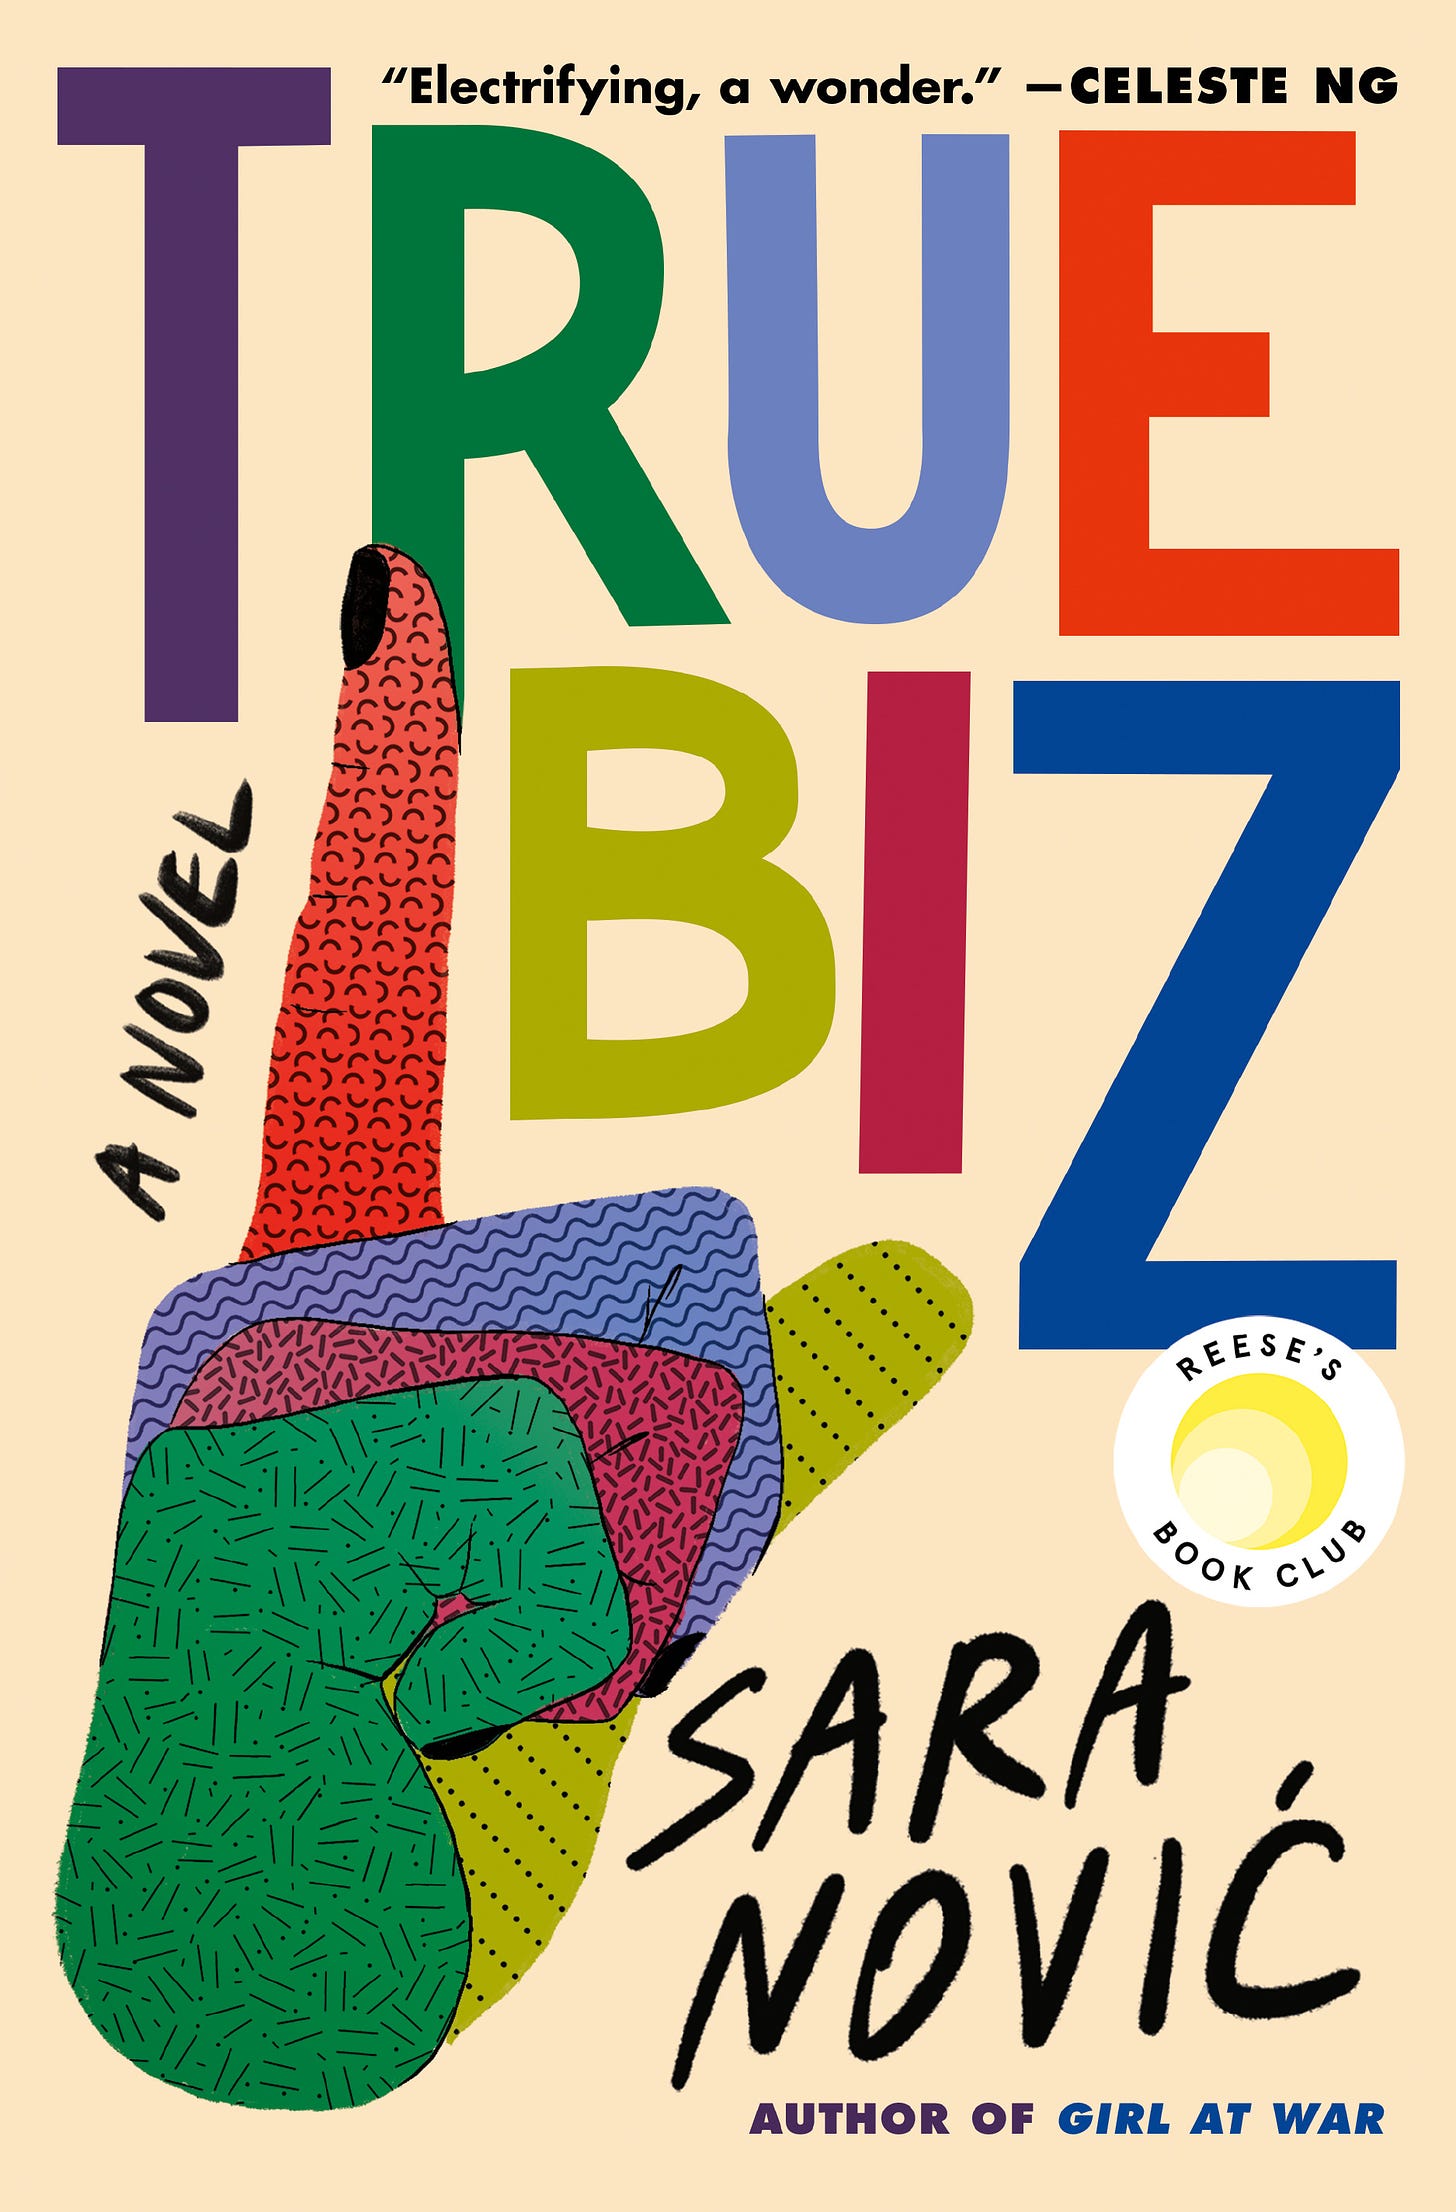 A beige background with the text of TRUE BIZ spelled out using a different color for each letter, with an illustration of a multi-colored hand forming the American Sign Language sign for “true biz.” The author’s name appears in black all caps font, and the logo indicating the book is a Reese’s Book Club pick appears.